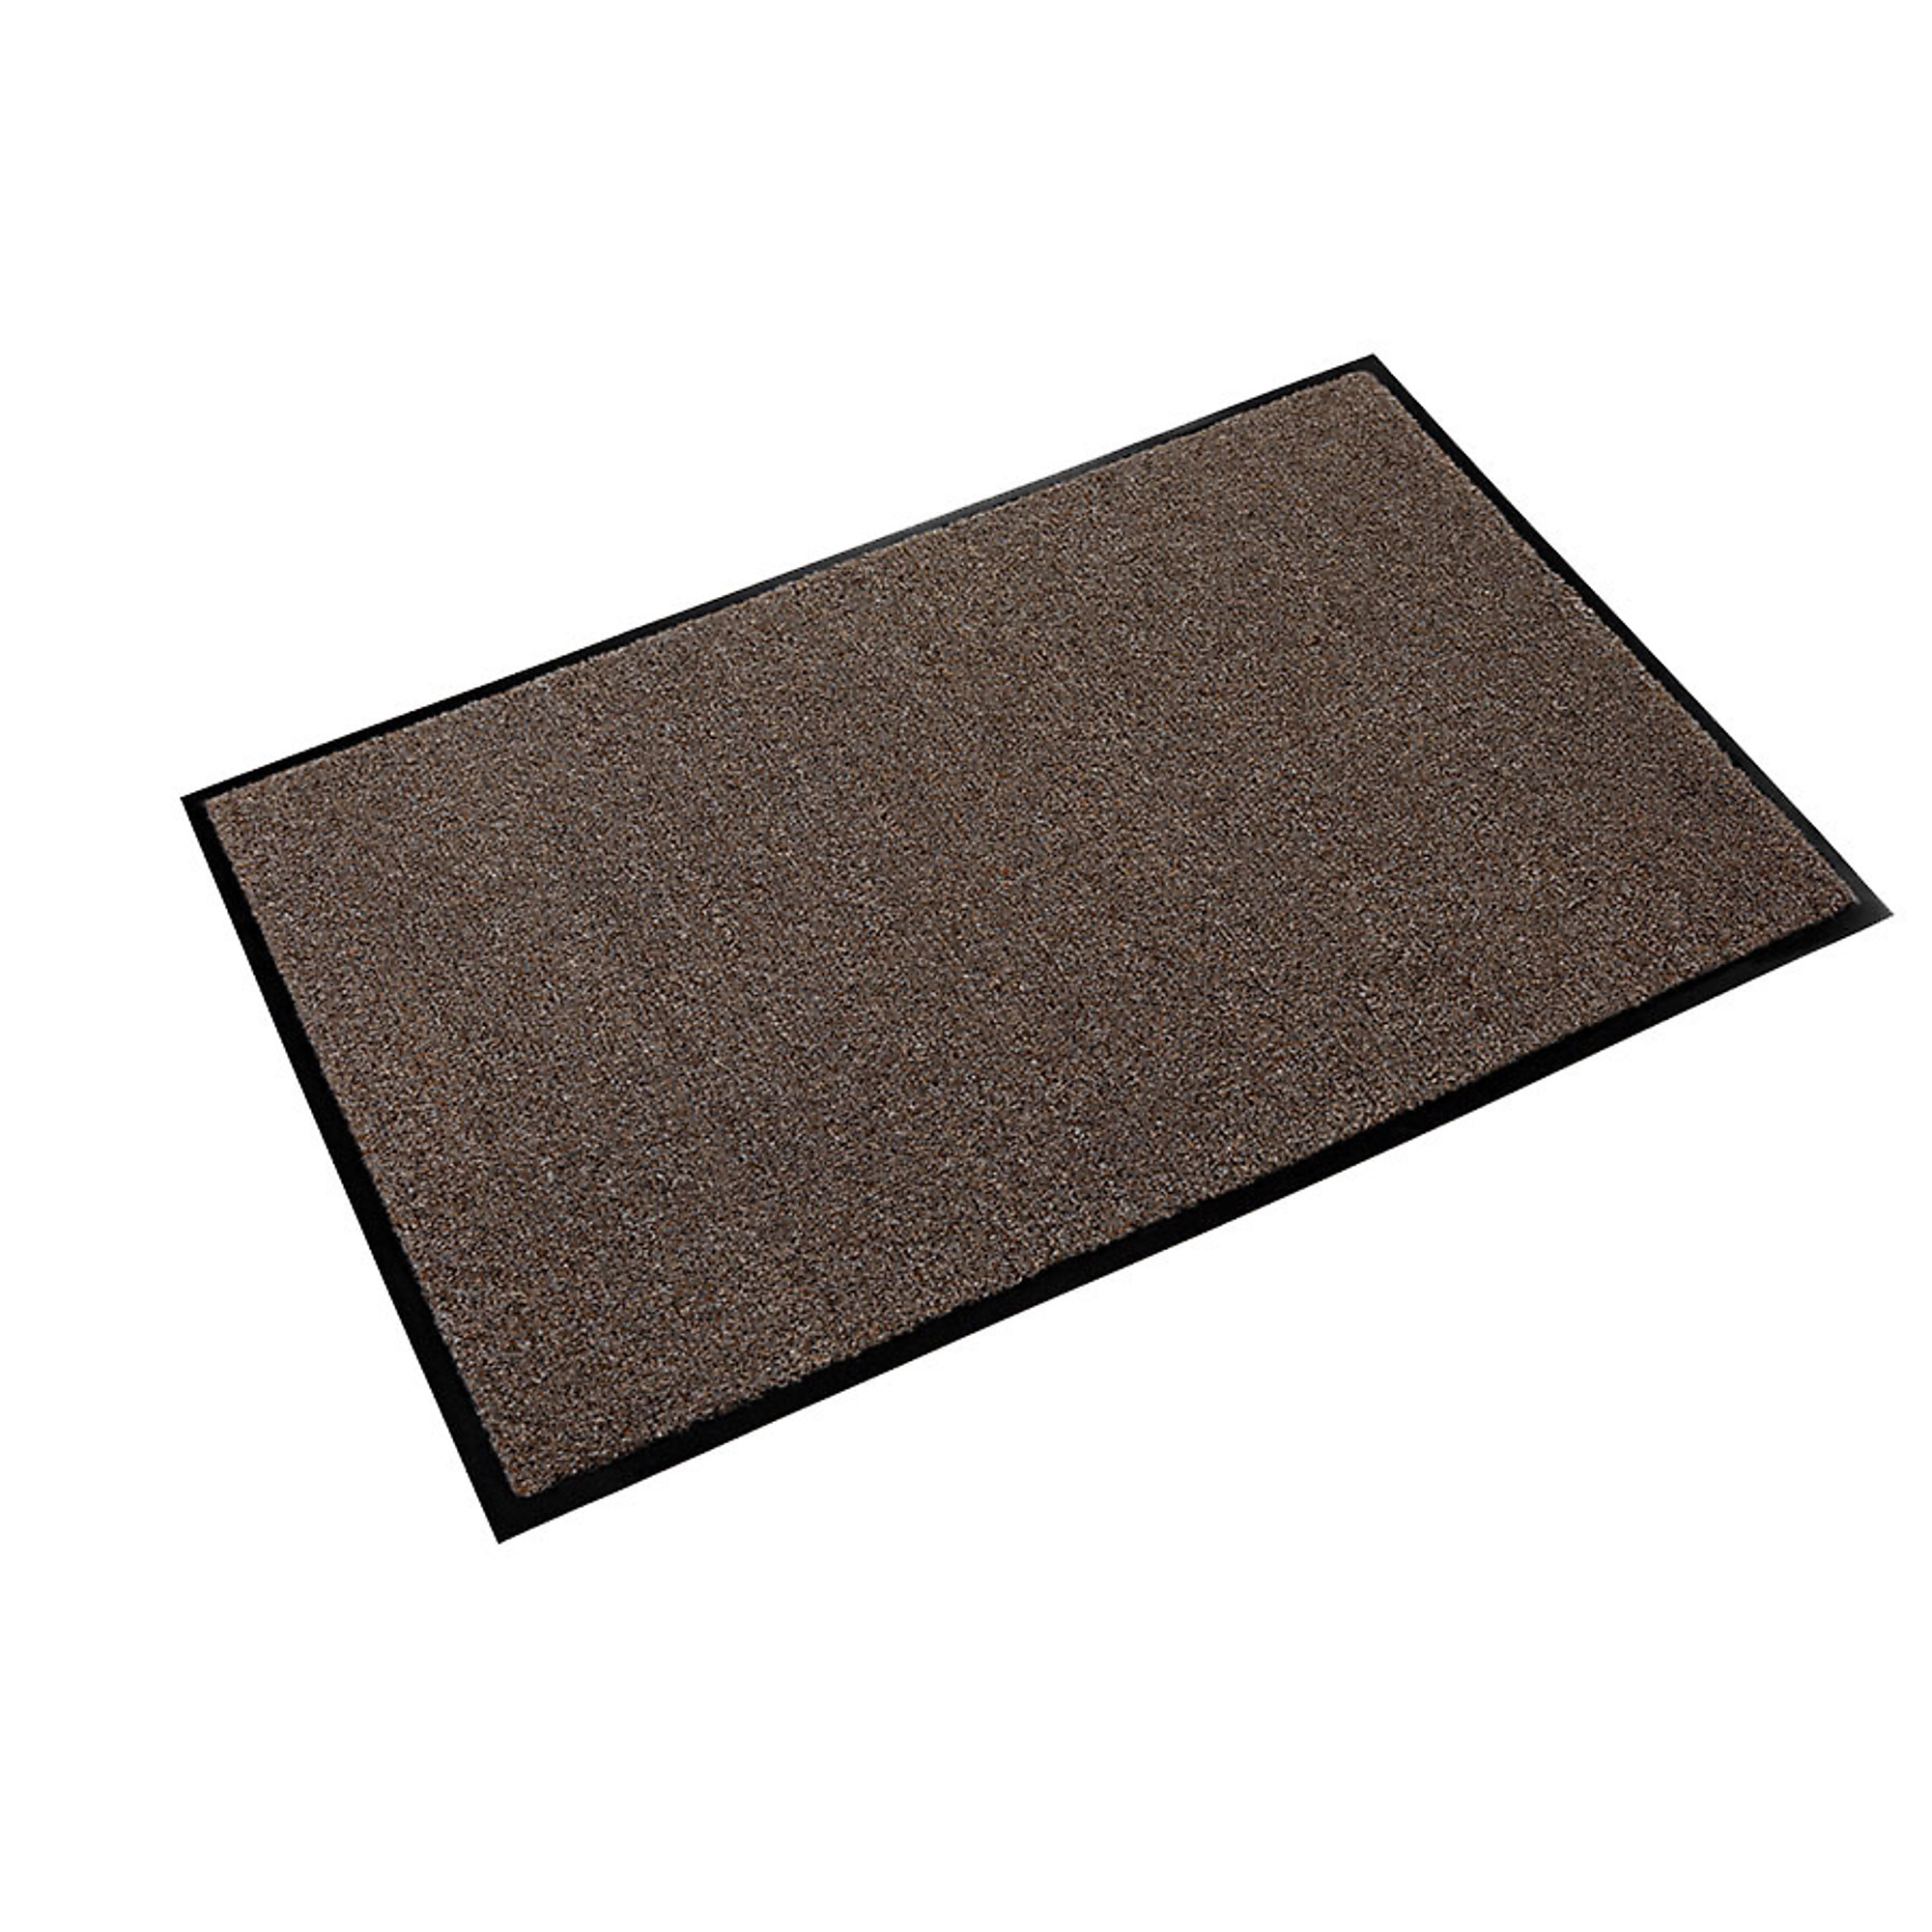 Crown Matting Technologies, Rely-On Olefin 3ft.x10ft. Walnut, Width 36 in, Length 120 in, Thickness 3/8 in, Model GS 0310WA